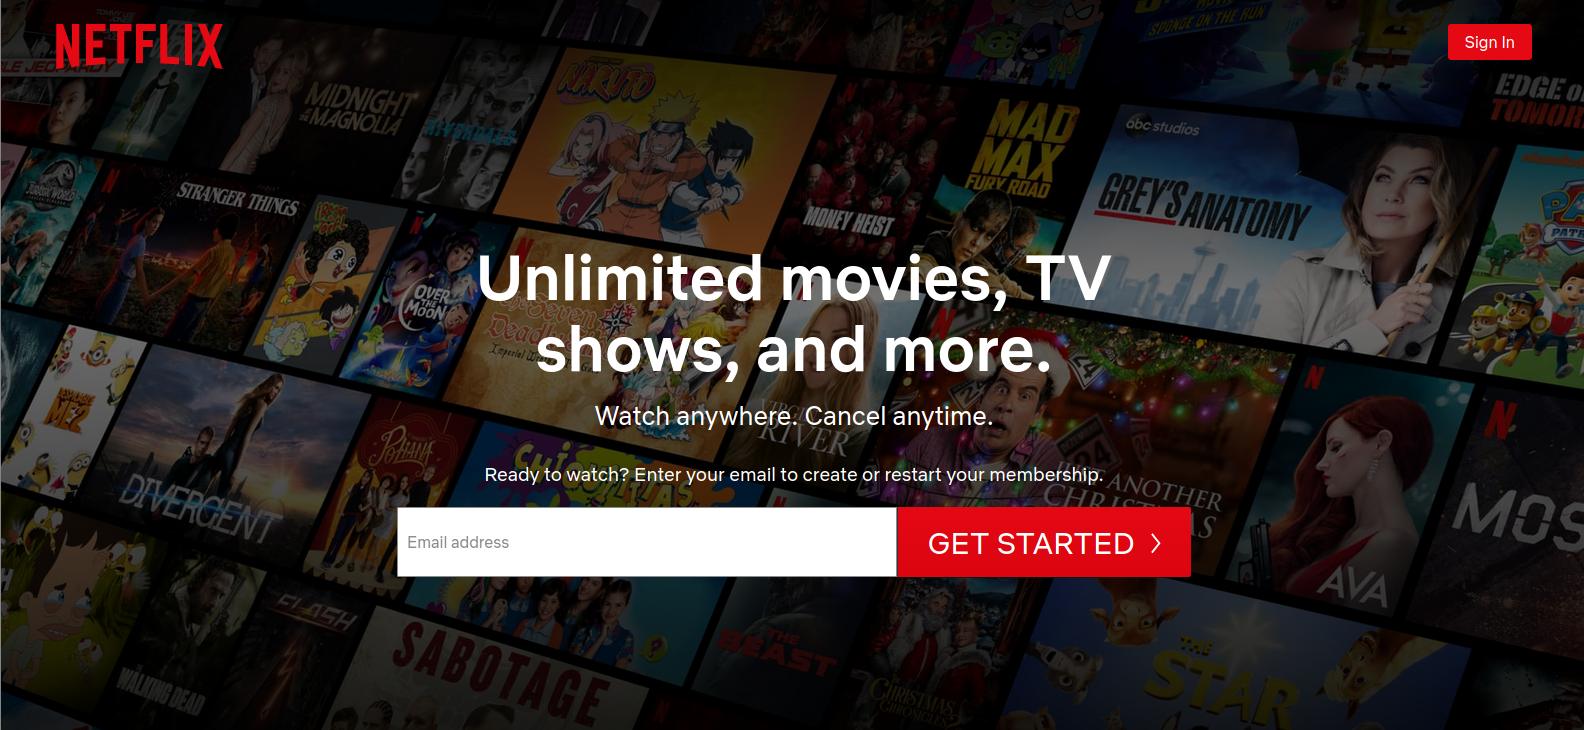 Netflix's landing page has a very identifiable call to action, with contrast and visibility